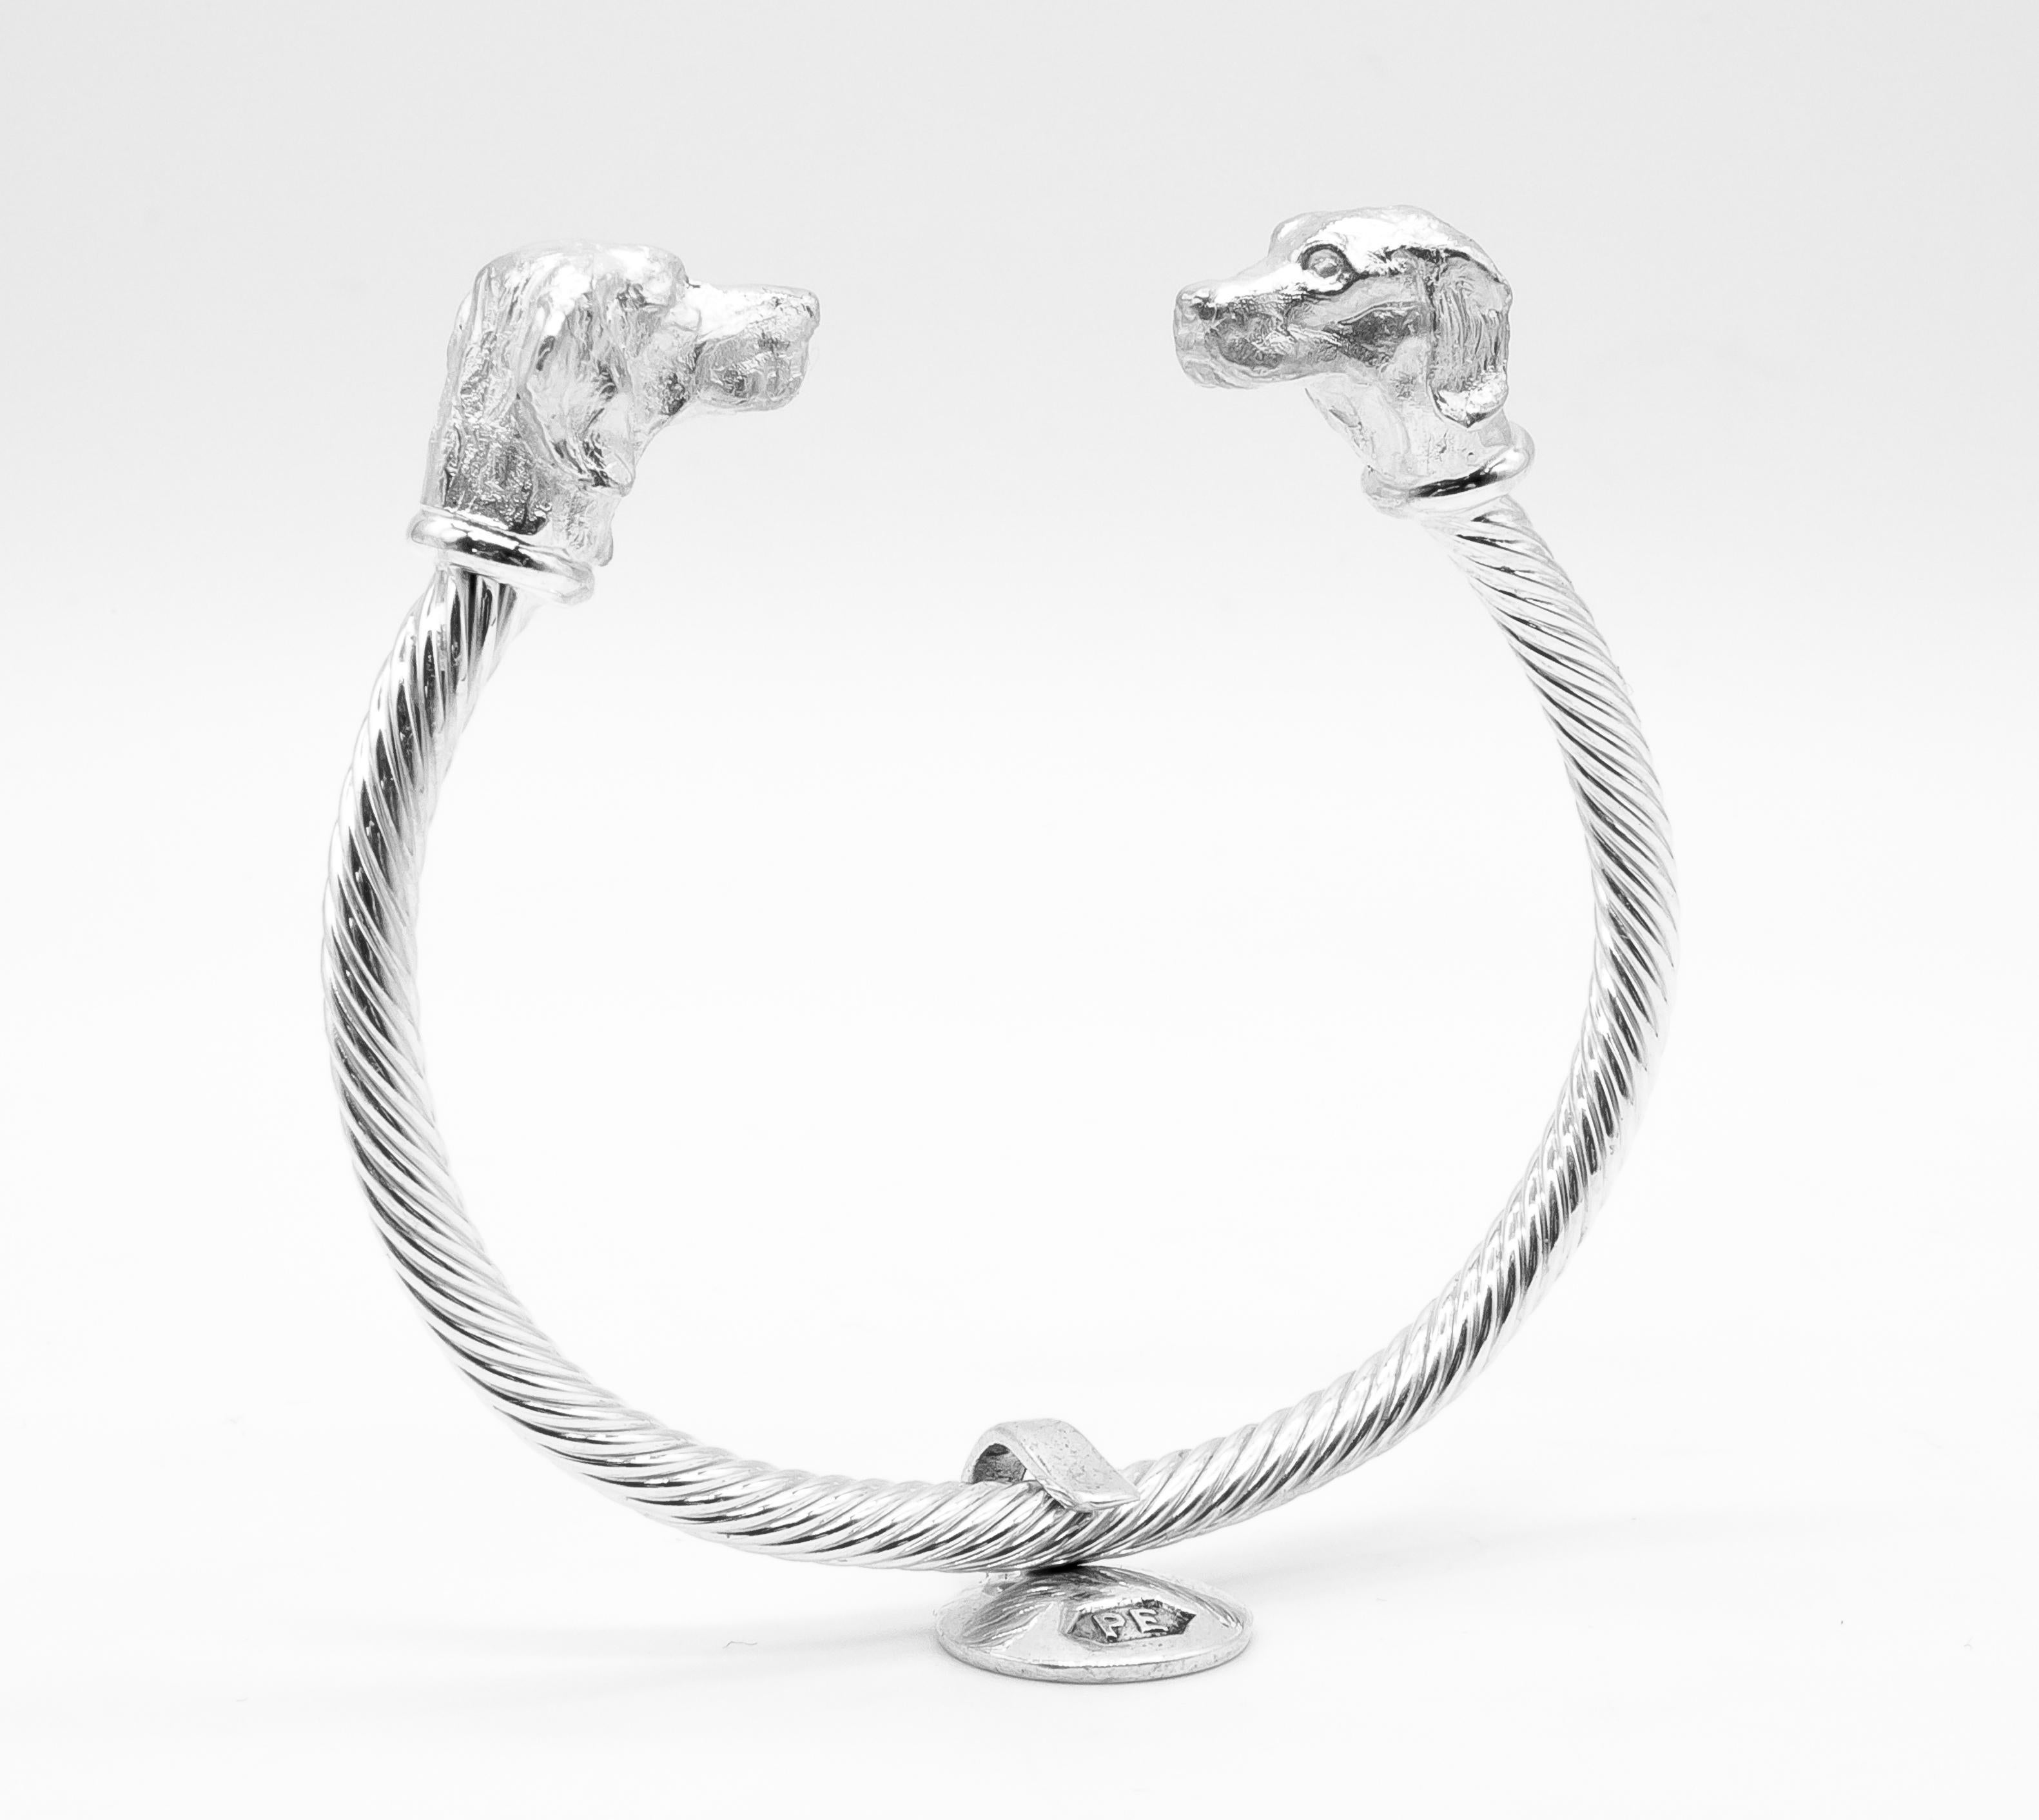 Artisan Paul Eaton Sculpted Pointer Dog Heads on Twisted Bangle in Sterling Silver For Sale